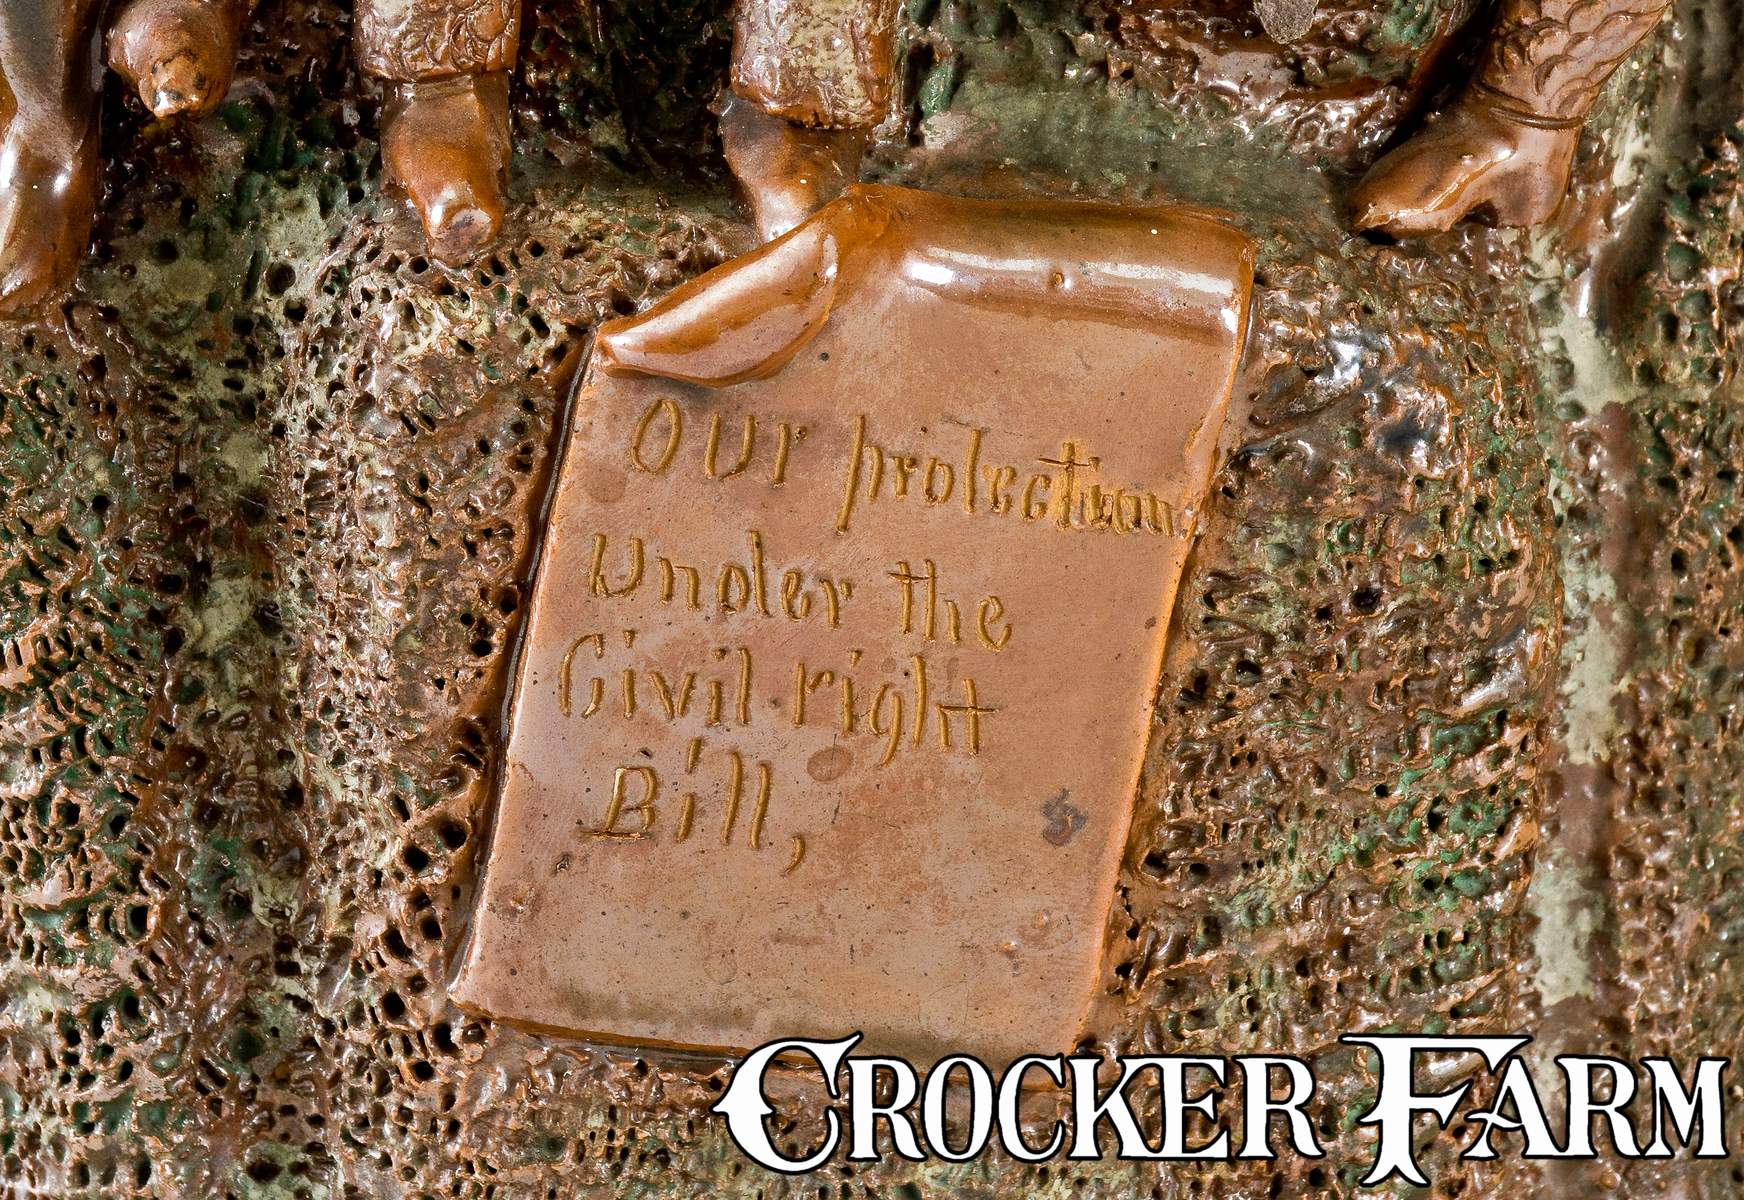 Detail of the Anna Pottery Liberty Monument: 'Our Protection Under the Civil Right Bill.'